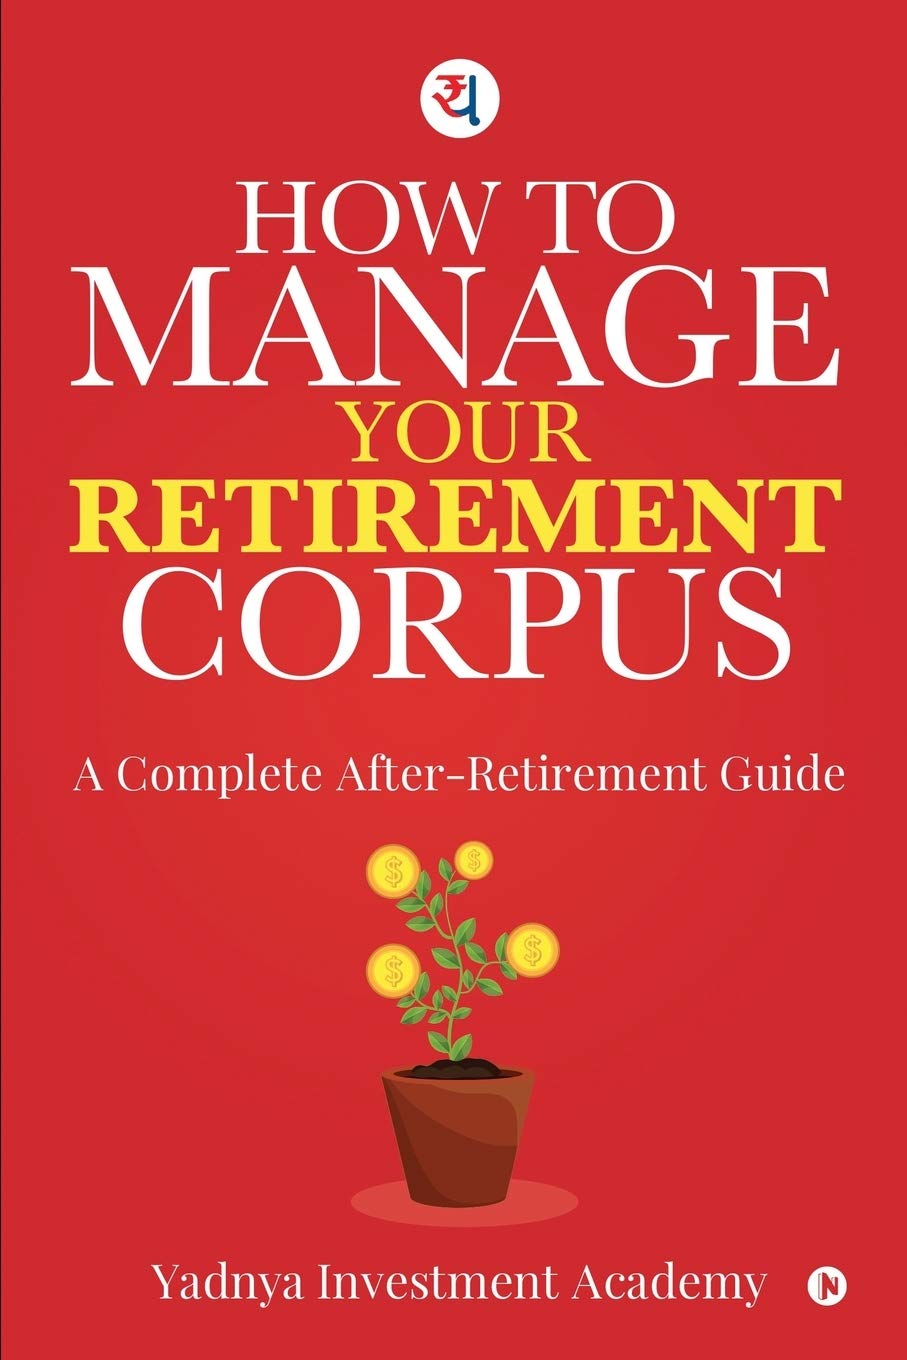 How to manage retirement